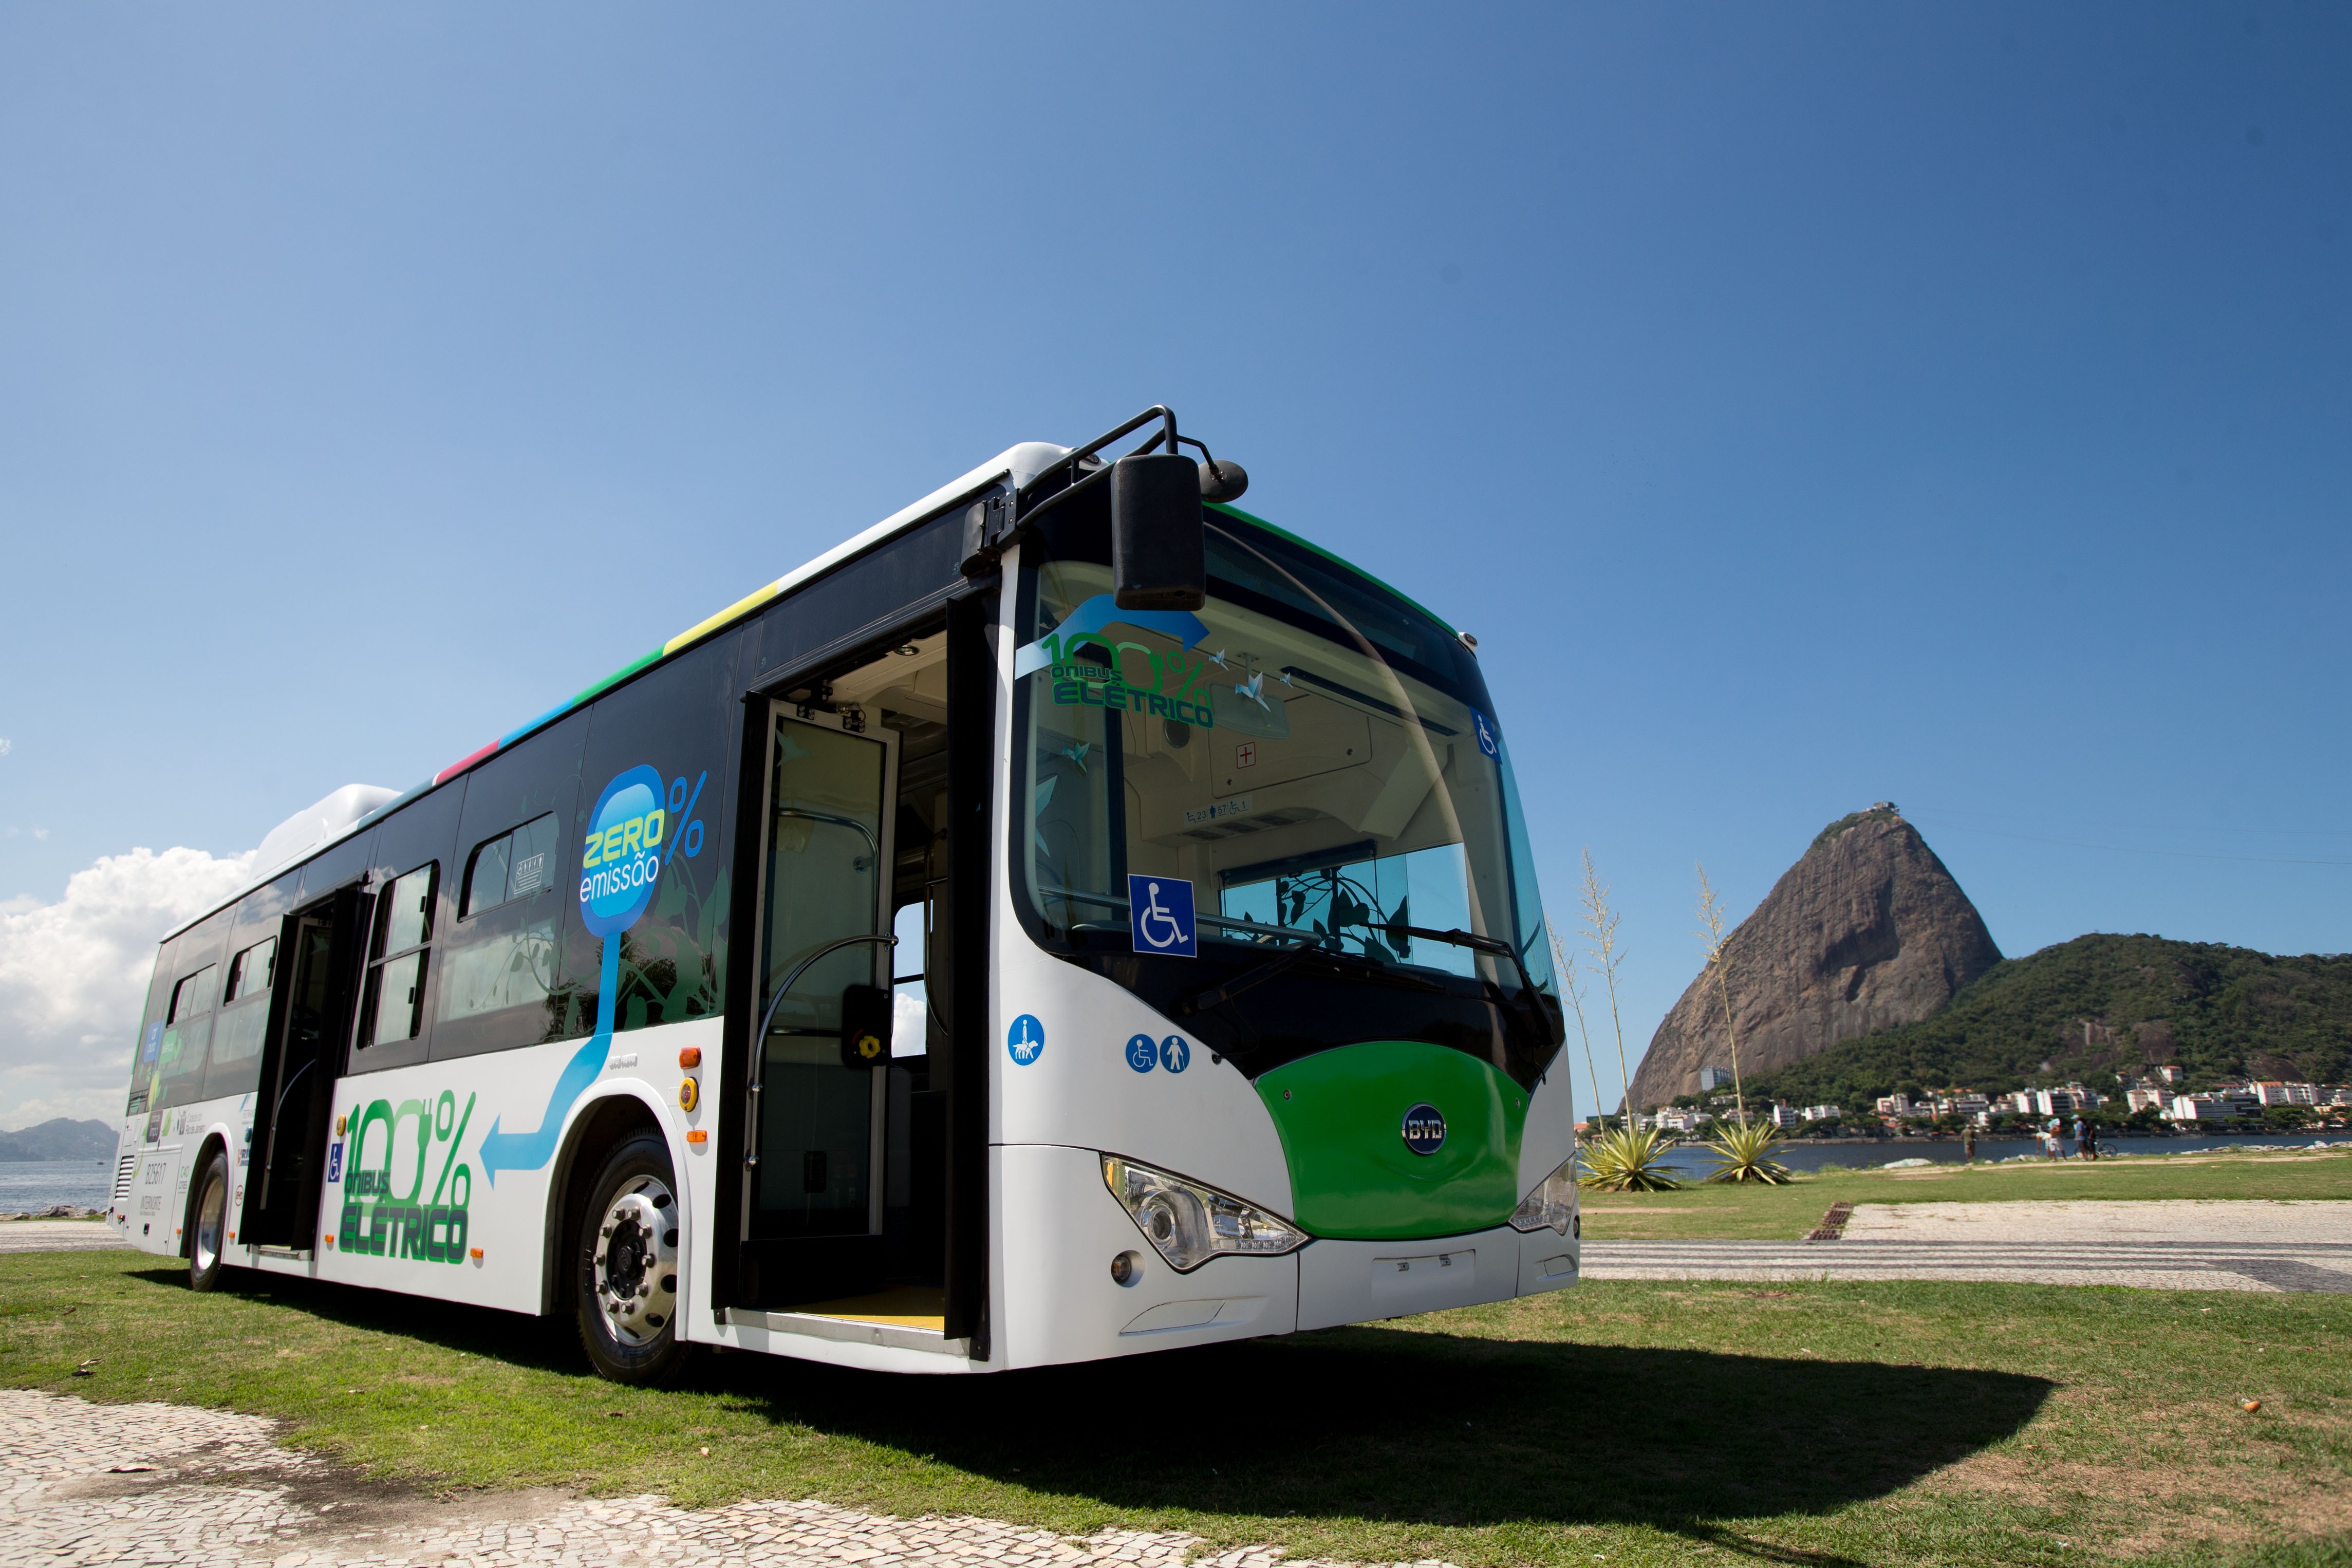 . A BYD electric bus is seen in Rio de Janeiro. Nearly a dozen elected officials and government representatives, including US House Majority Leader Kevin McCarthy, attended a ceremony celebrating the Chinese company’s expansion of its Lancaster, California factory. Photo: Xinhua